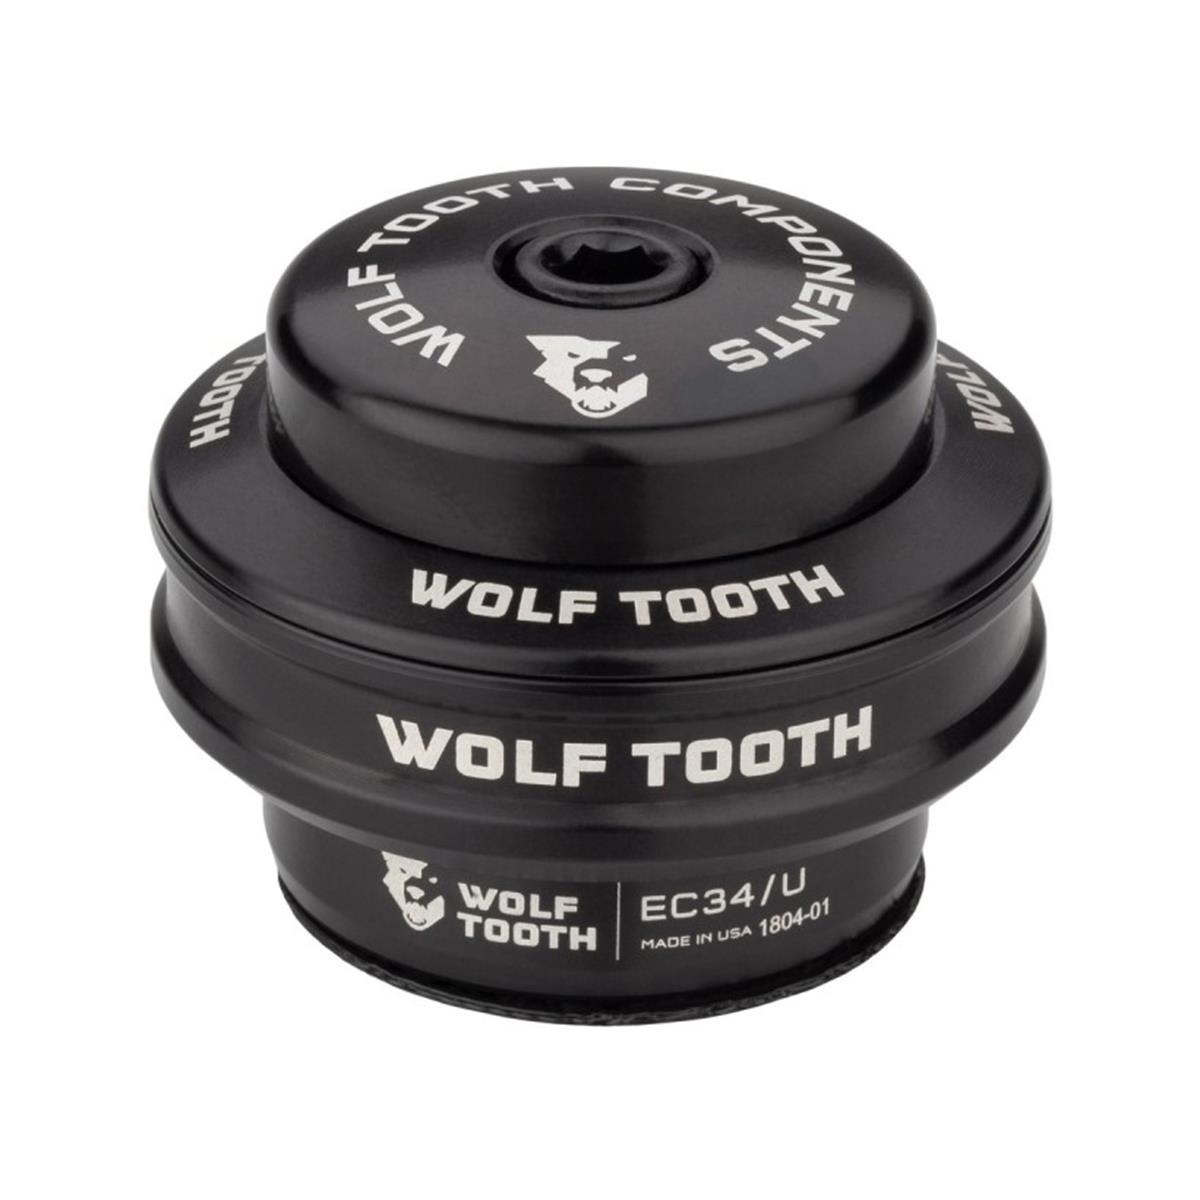 Steuerung wolf tooth Direccion Externa Sup 28.6/16Mm